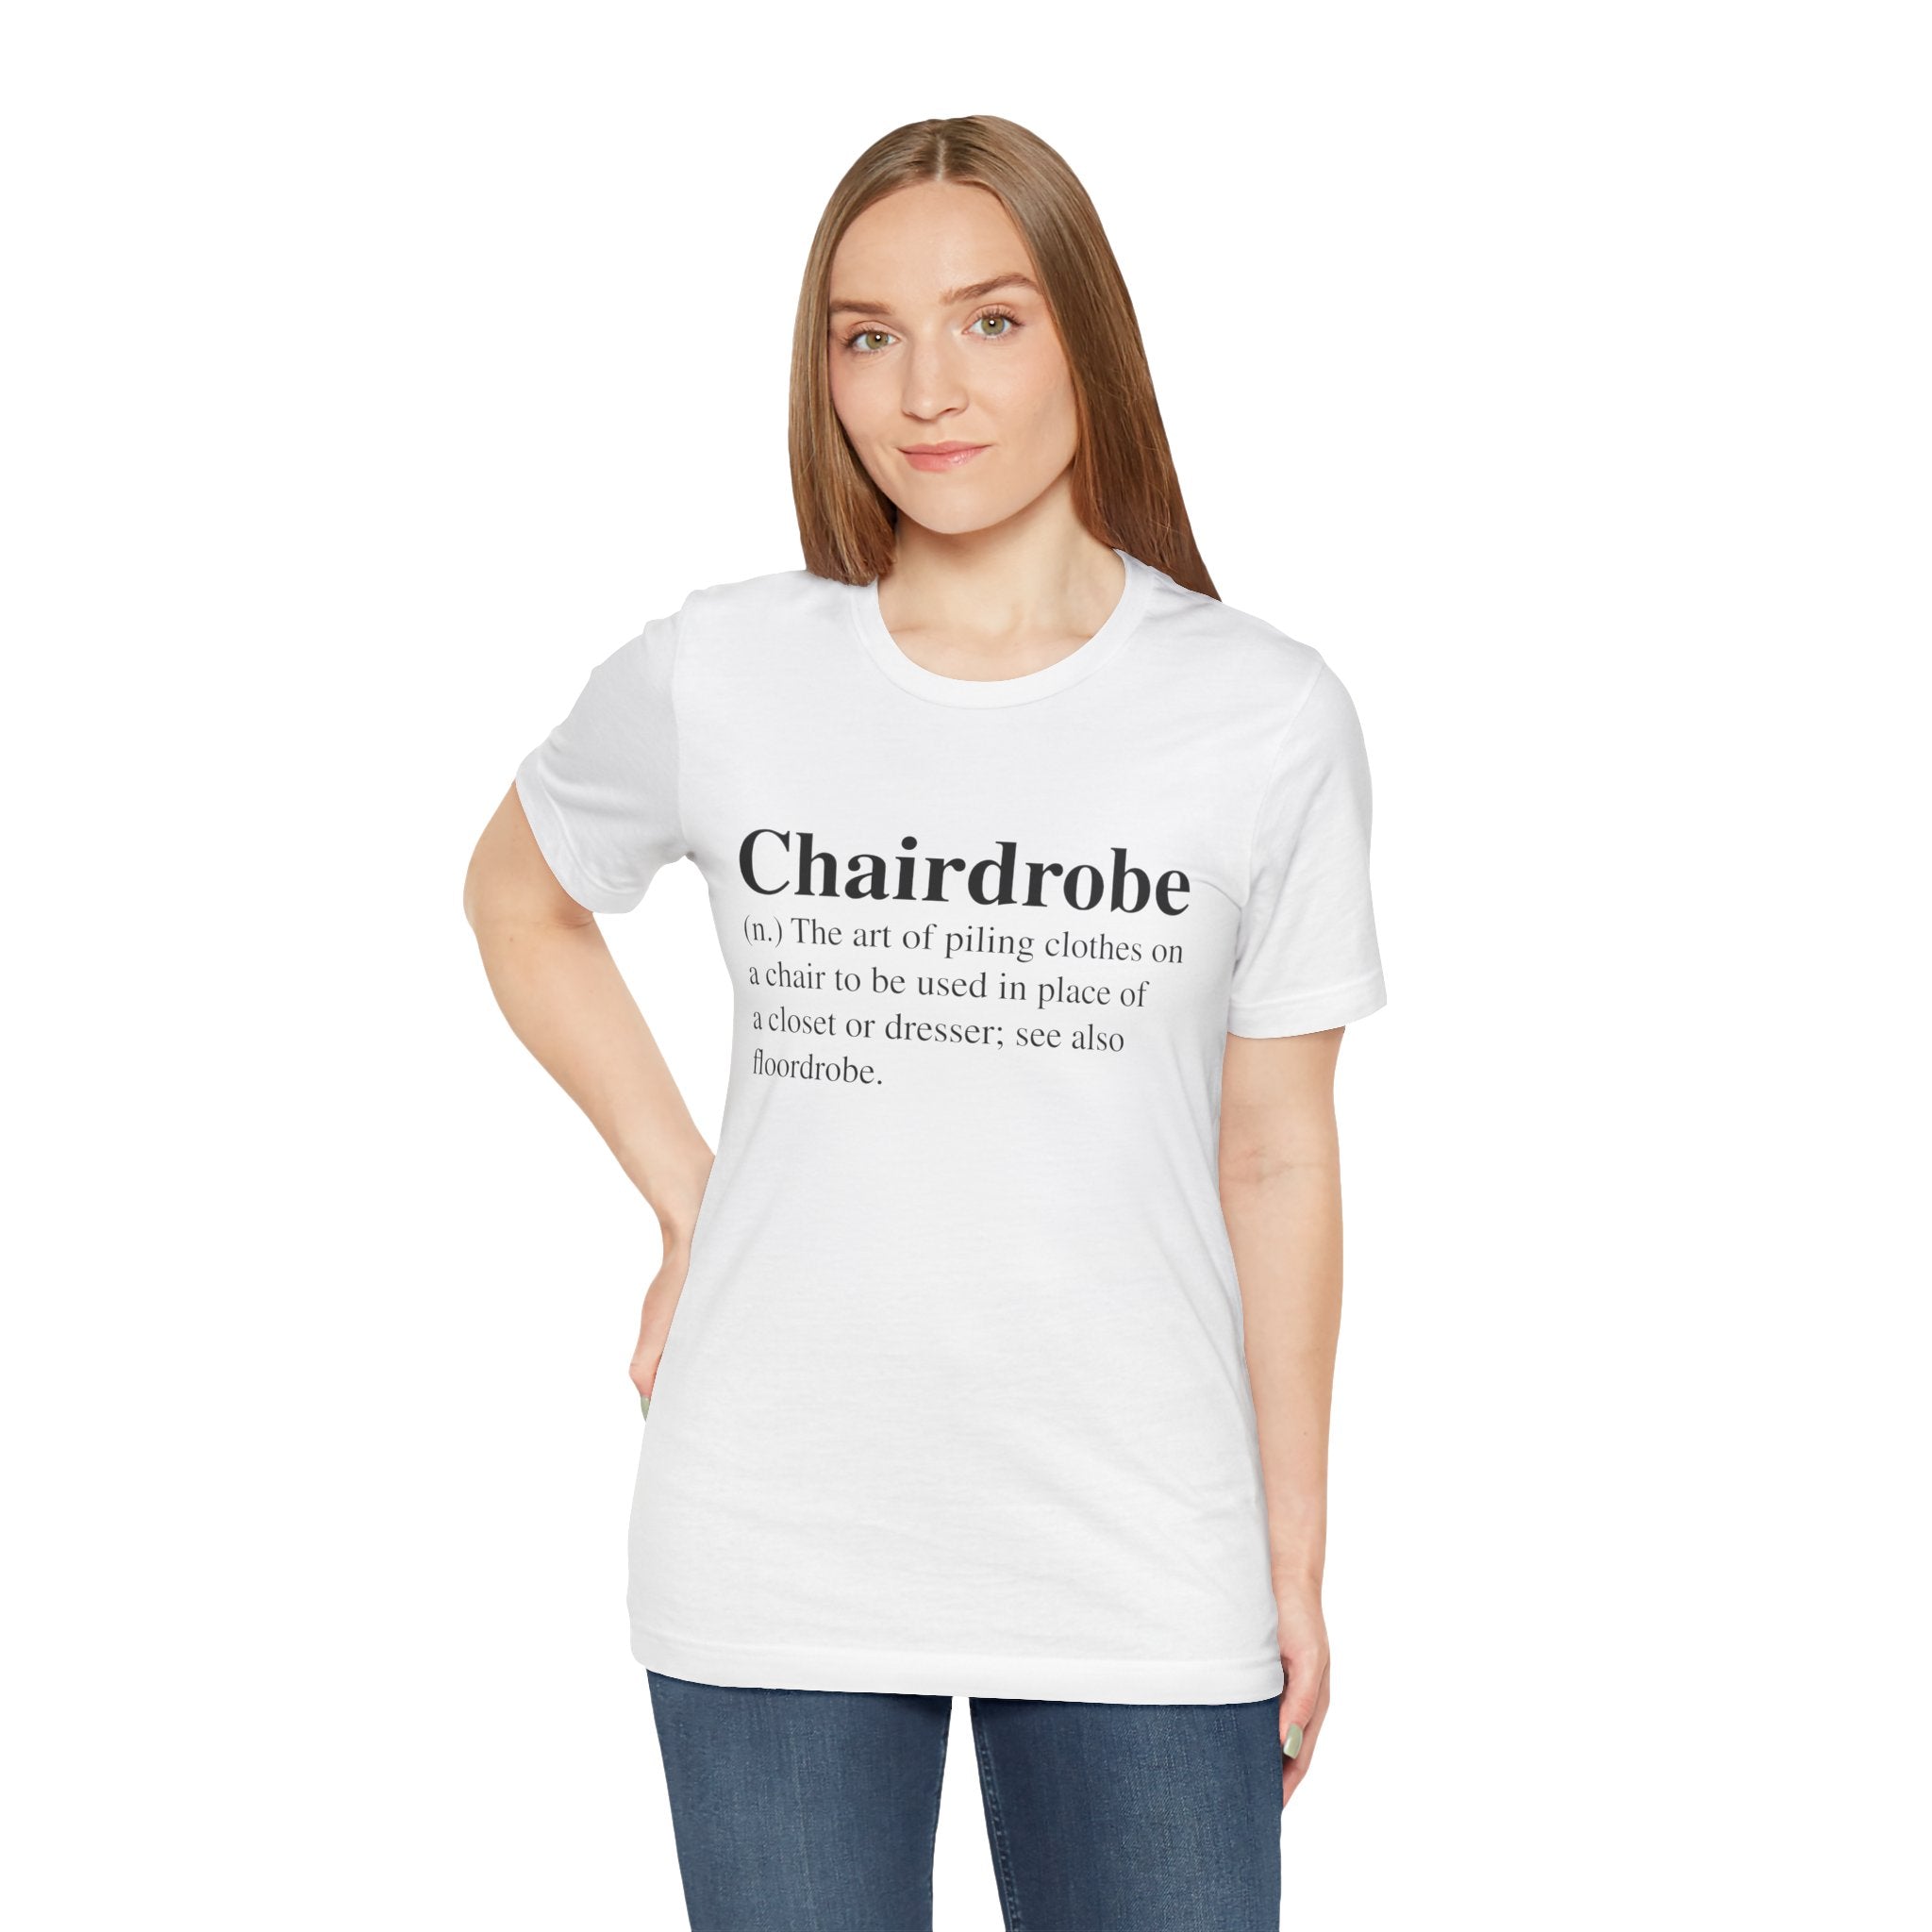 Young woman wearing a Chairdrobe T-Shirt with the word "chairdrobe" and its humorous definition printed on the front.